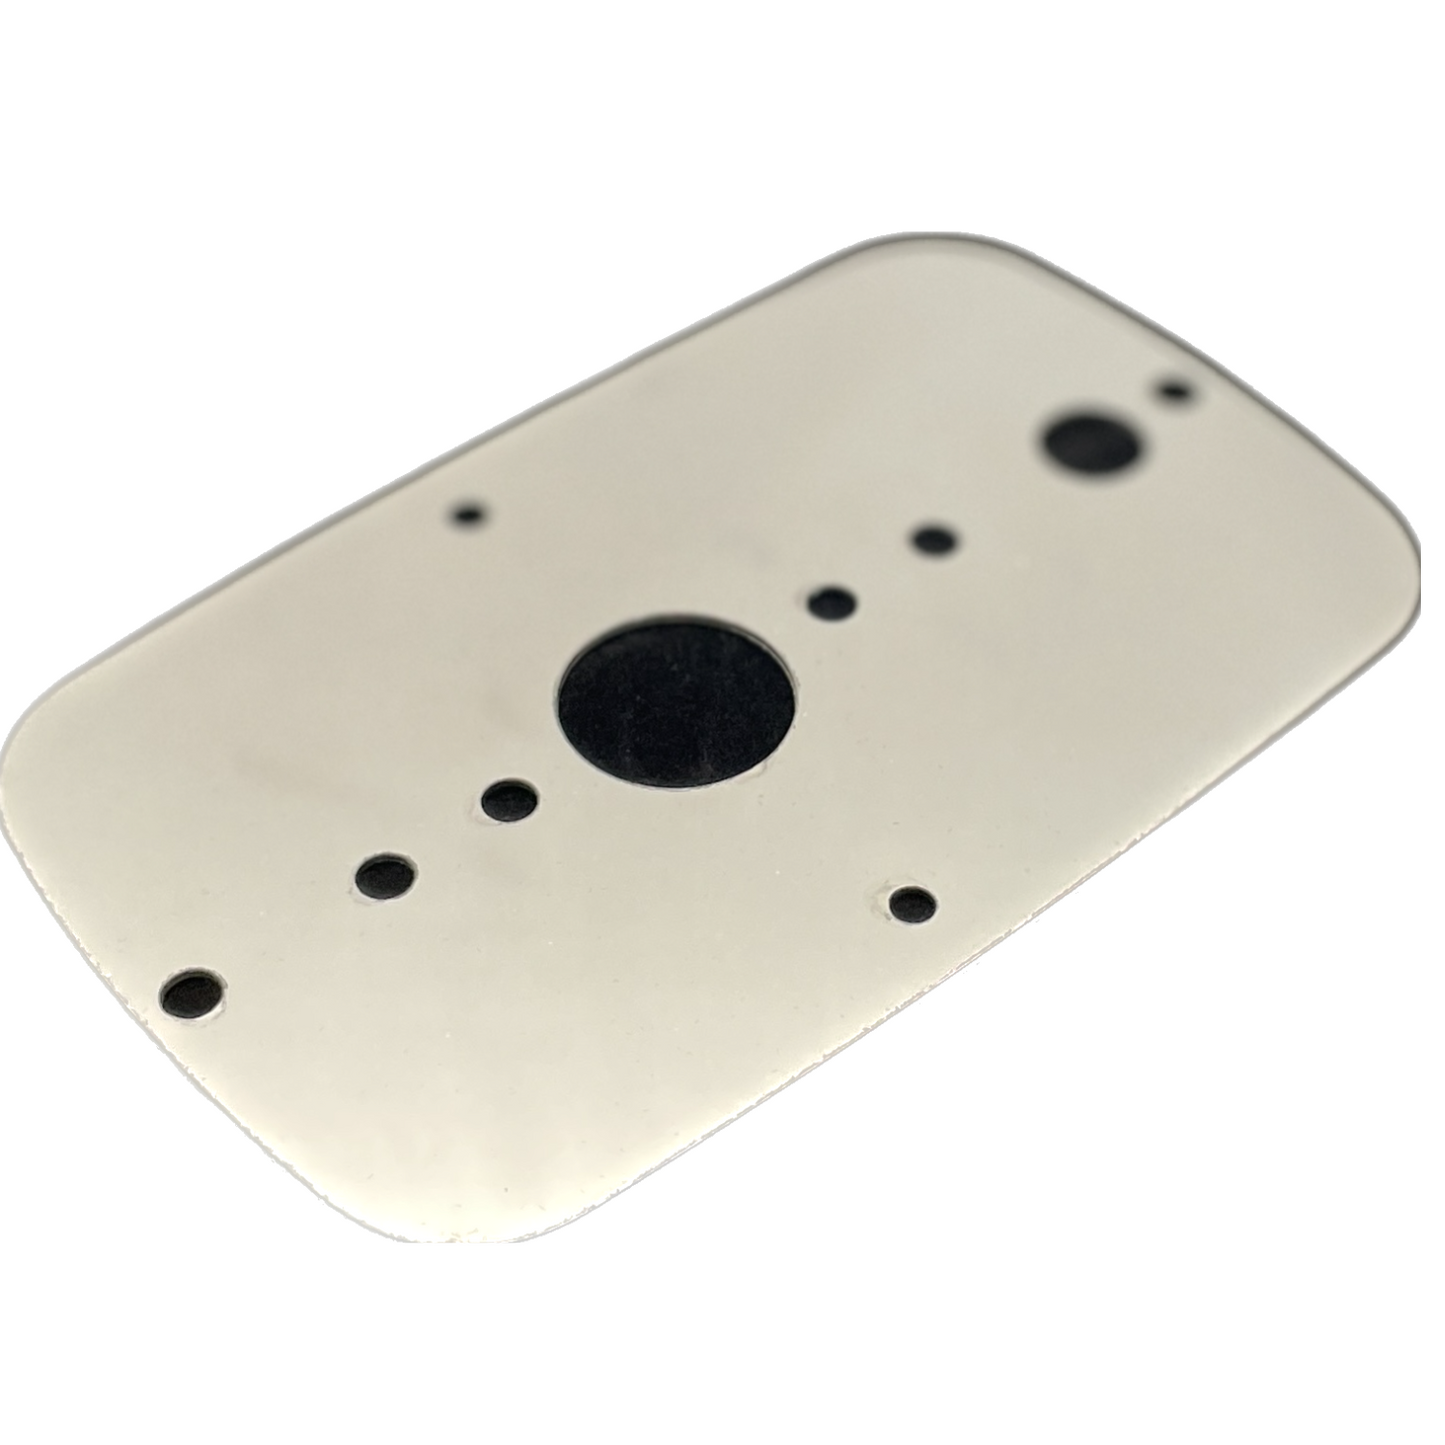 Peterbilt 389 Stainless Steel Single Watermelon Sleeper Dome Light Plate With Switch